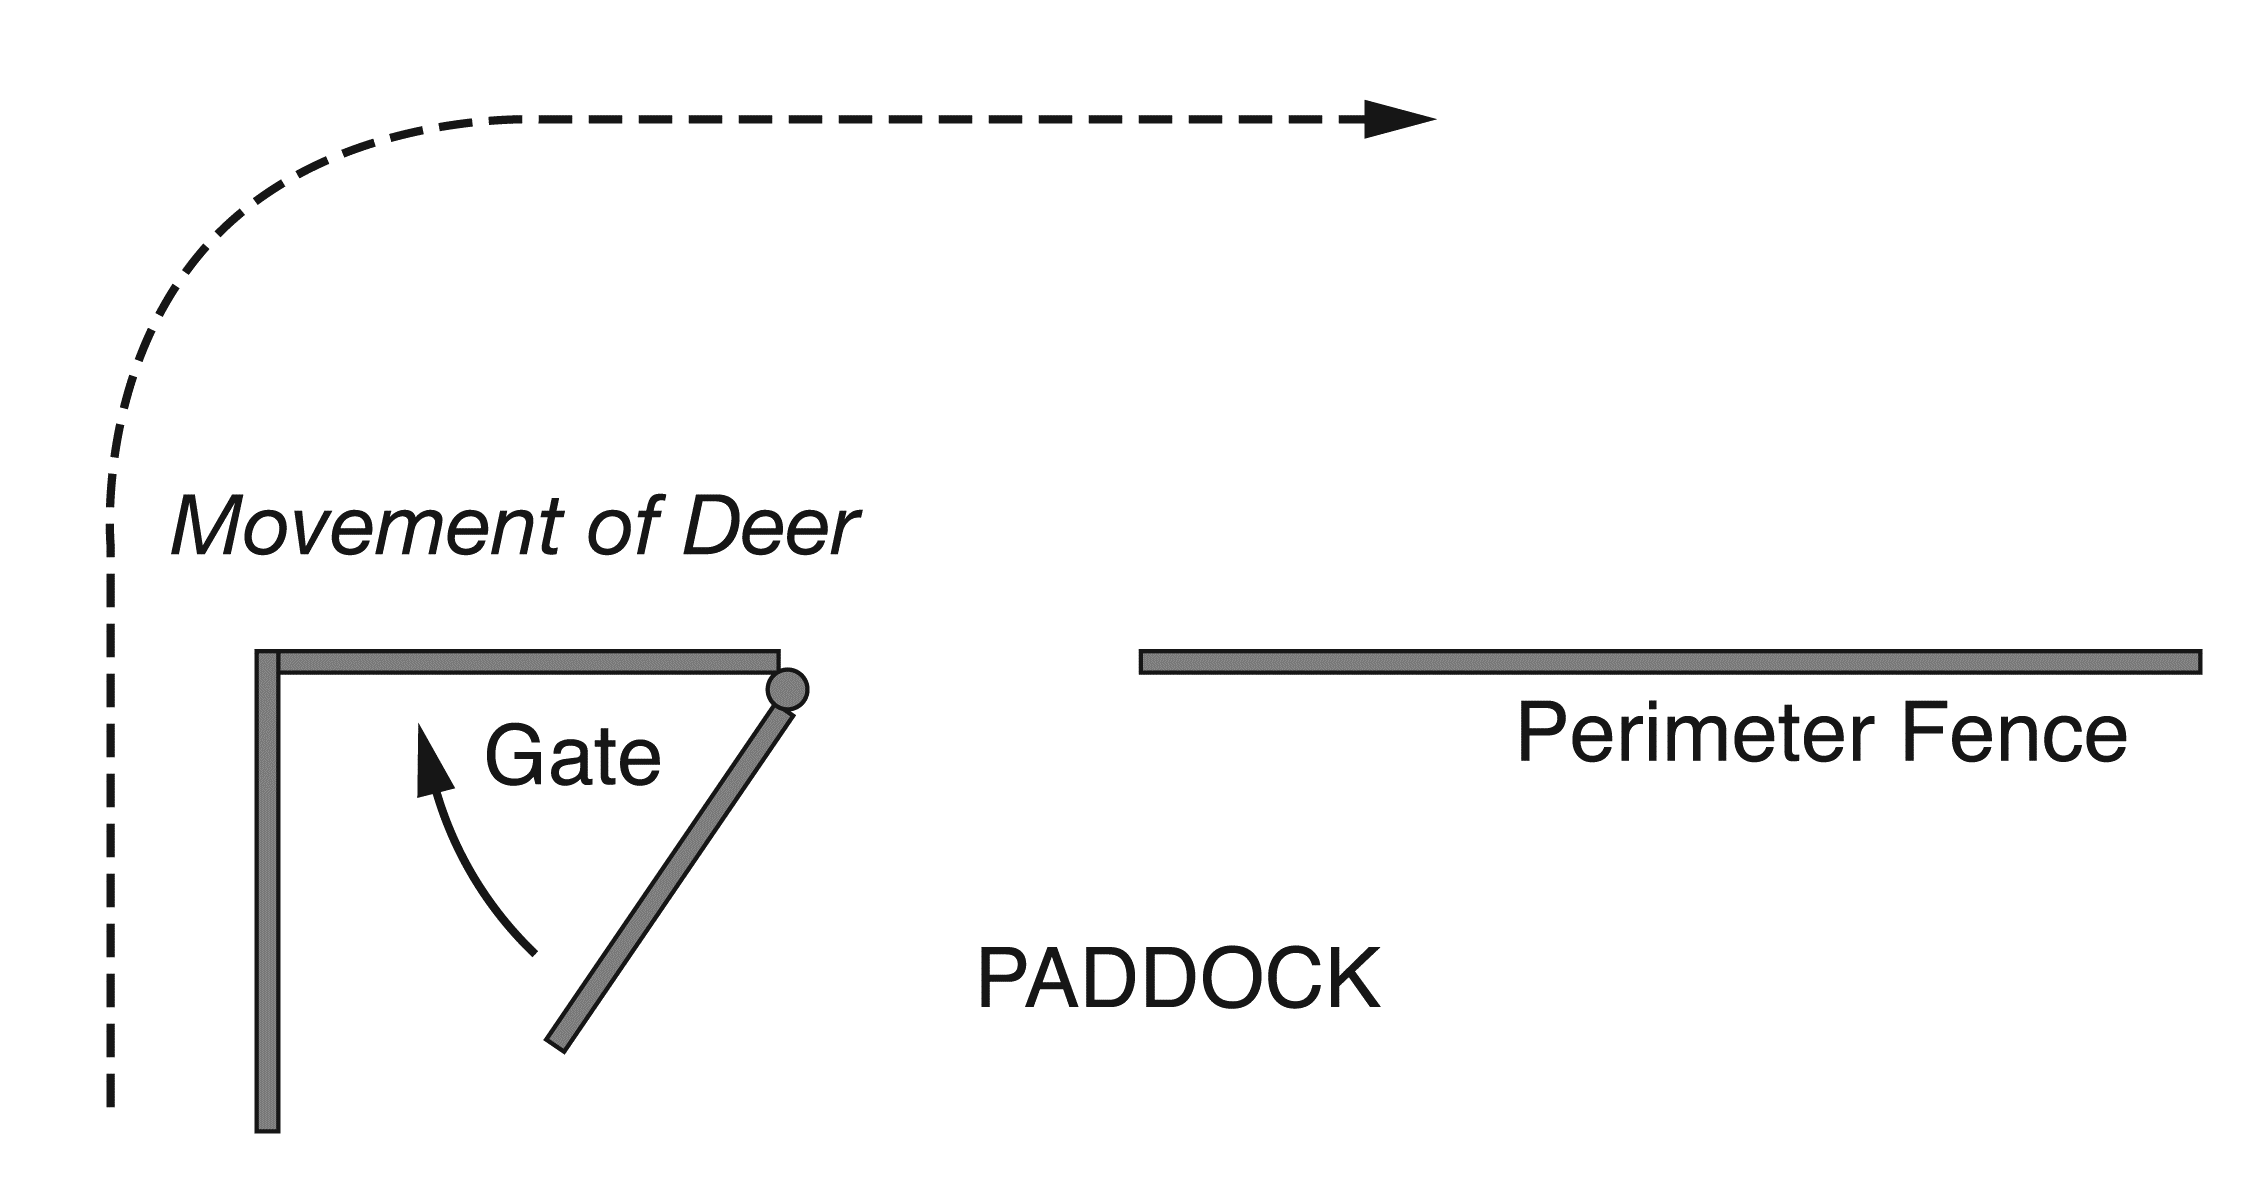 A drawing showing a gate too close to a corner when two peerimeter fences meet, the animals may not turn towards the gate or opening quickly enough.